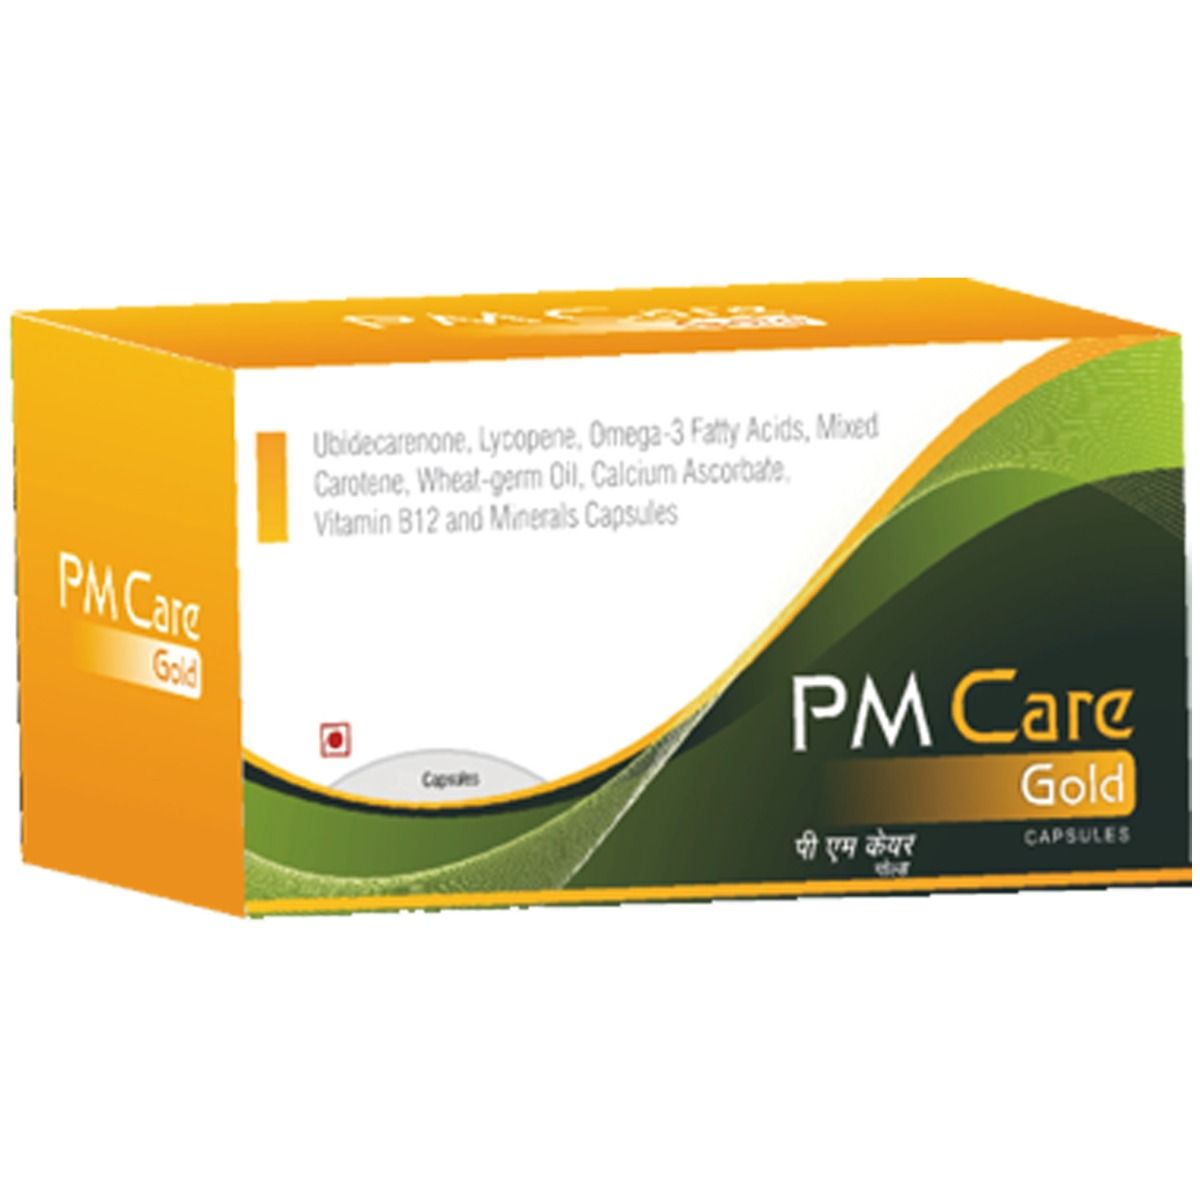 Buy PM Care Gold Capsule 15's Online